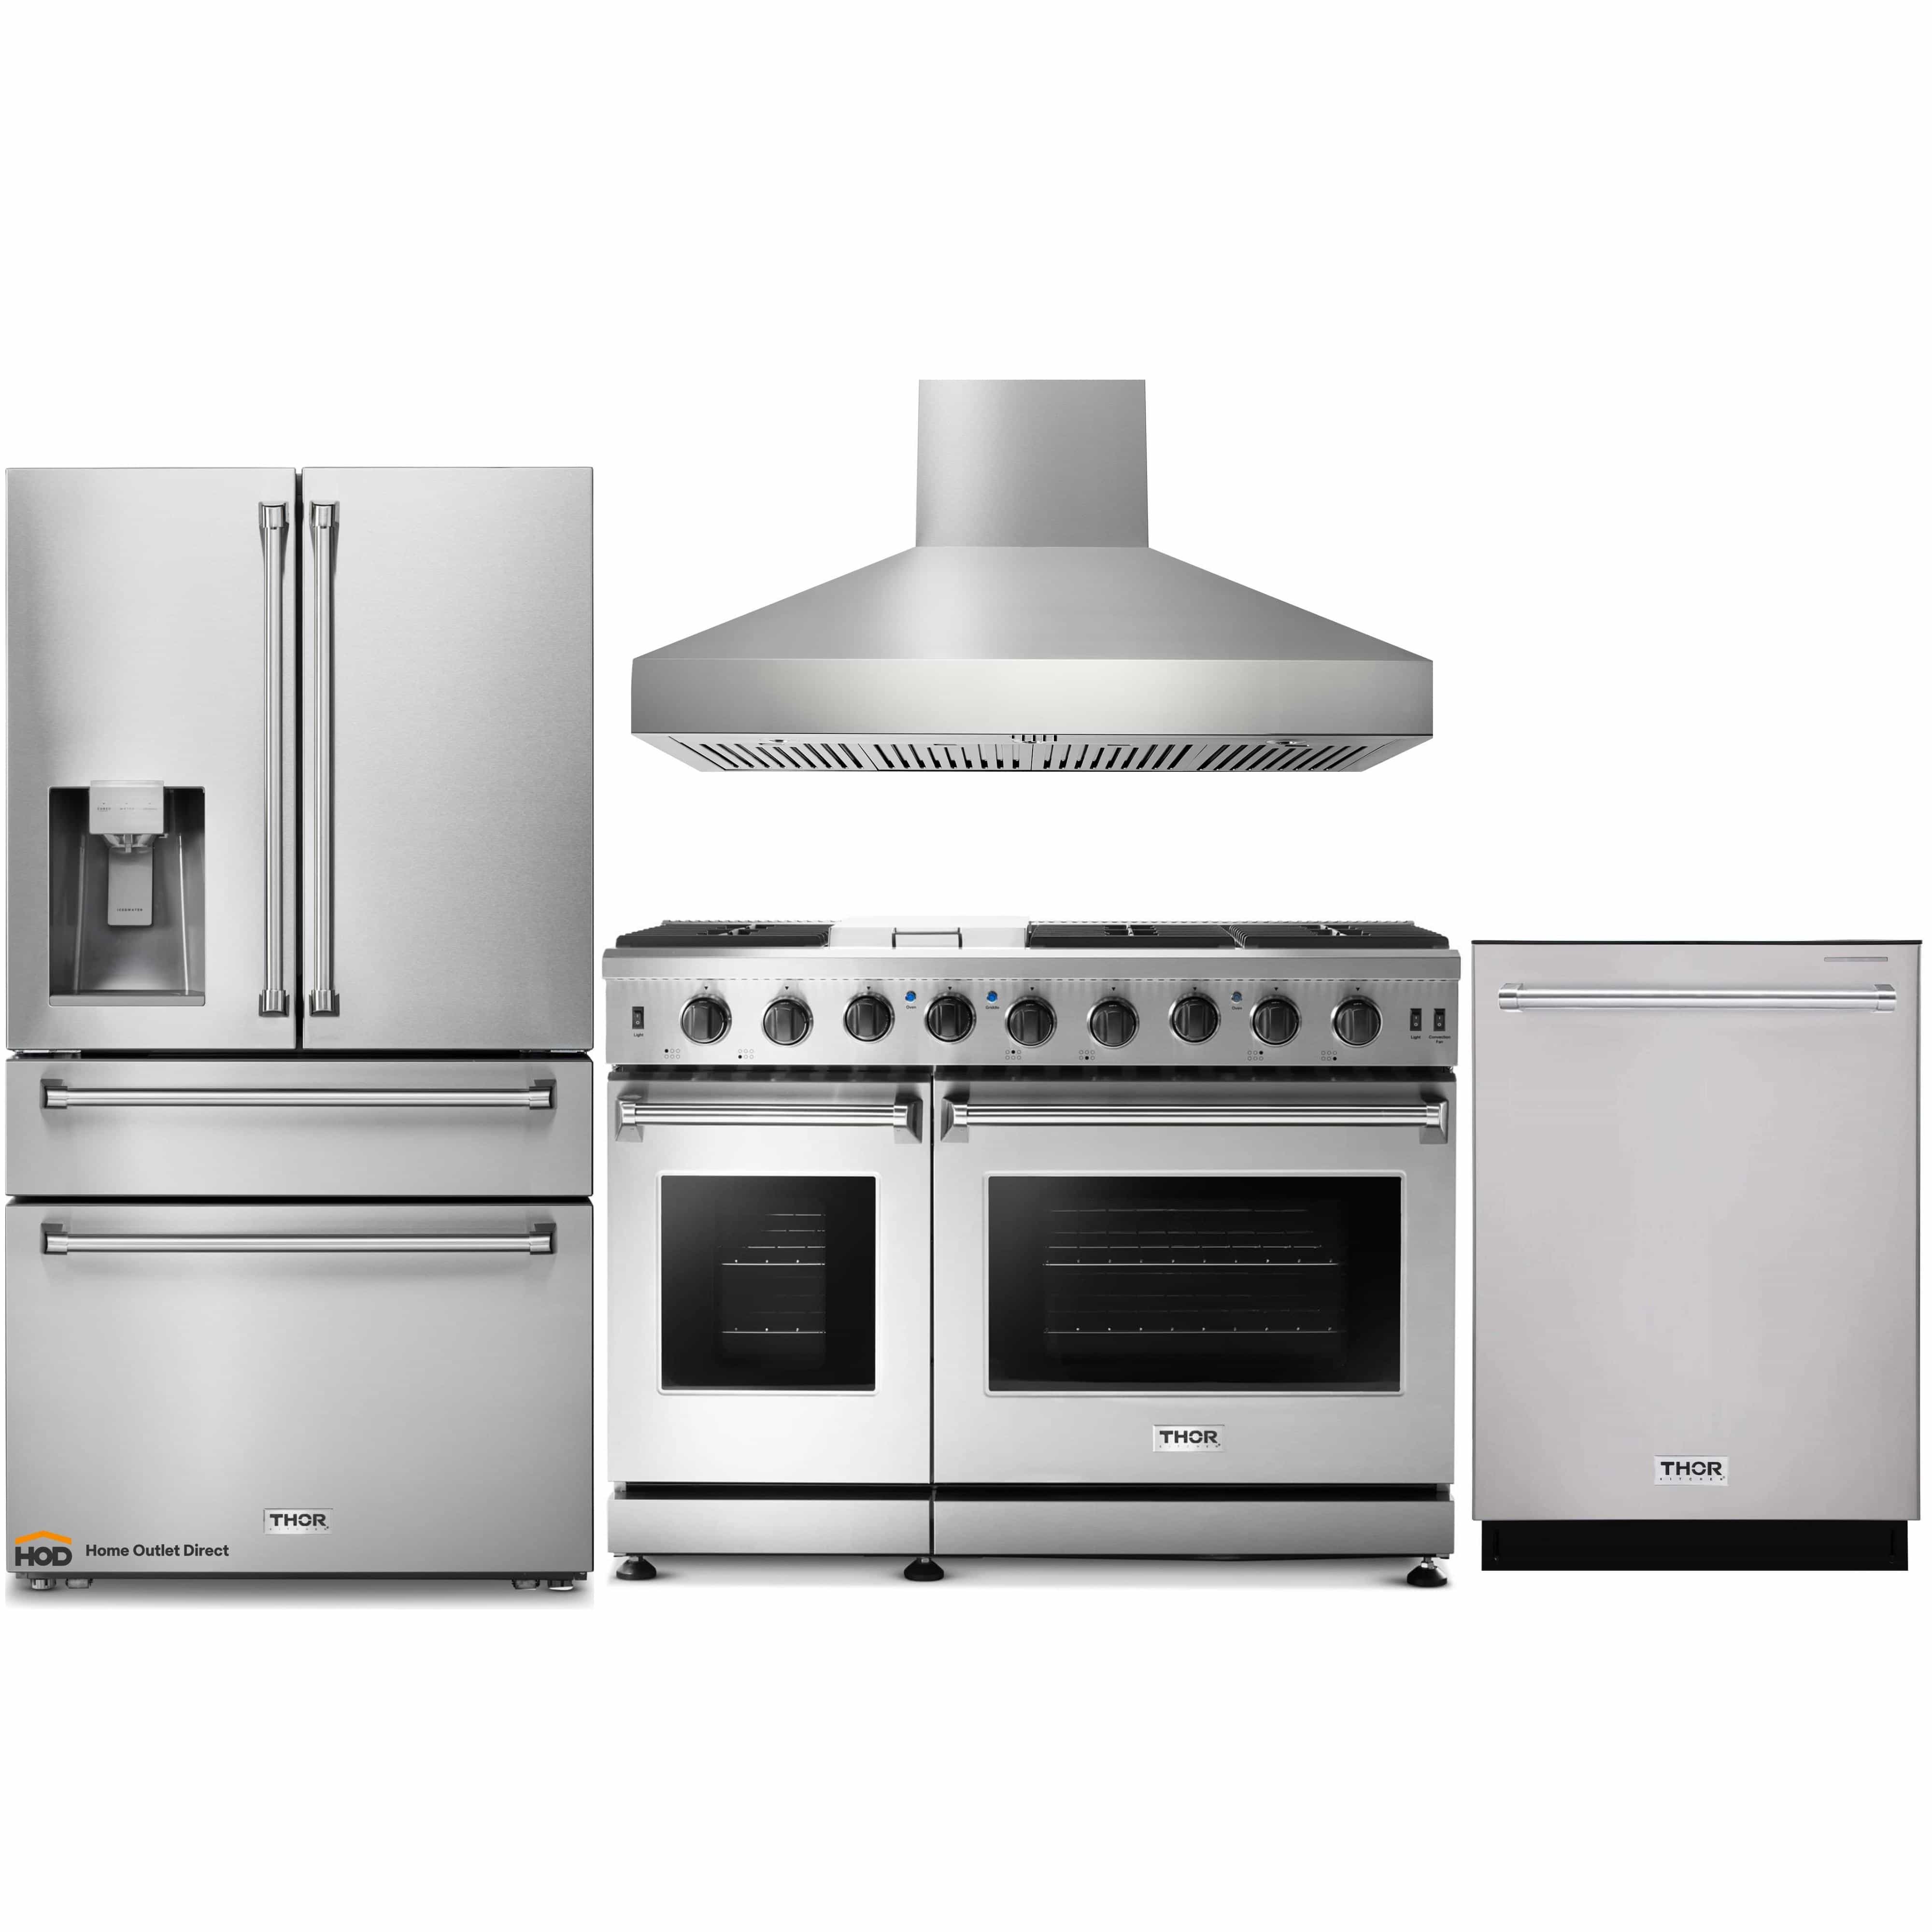 Thor Kitchen 4-Piece Appliance Package - 48-Inch Gas Range, Pro Wall Mount Hood, Refrigerator with Water Dispenser, & Dishwasher in Stainless Steel